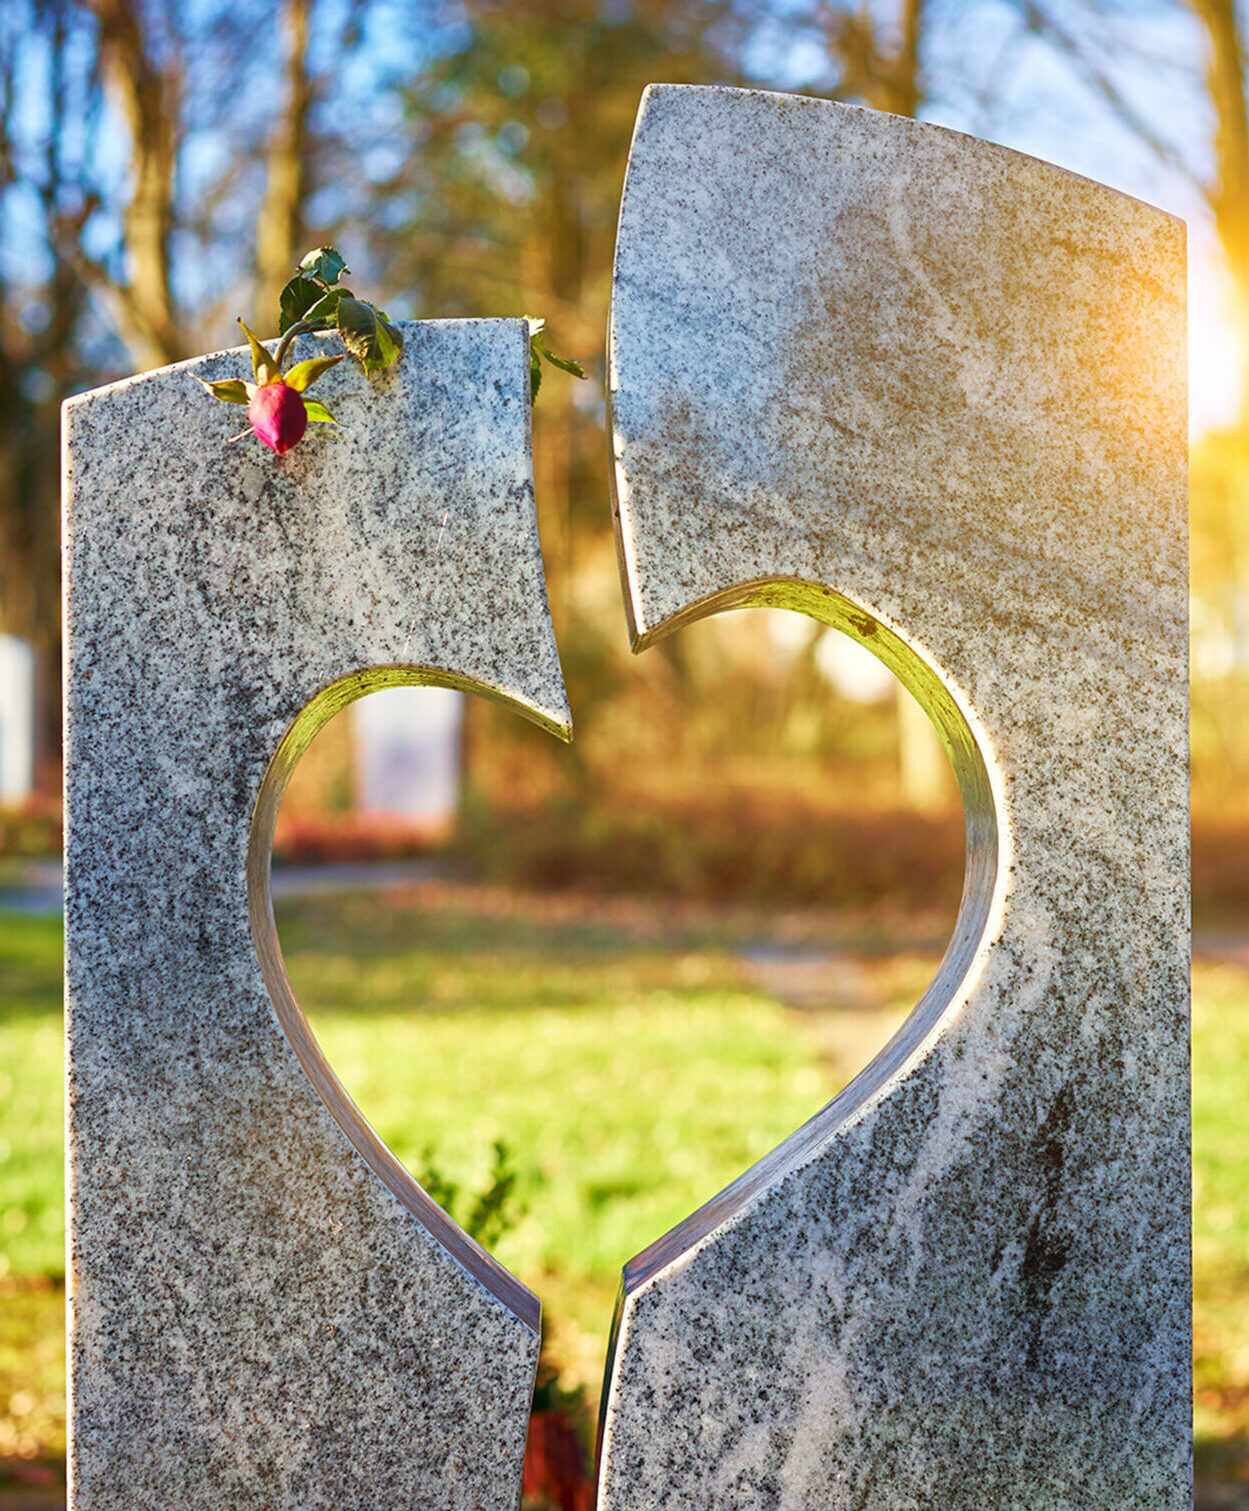 A gravestone with a heart-shaped cutout, with a red rose balanced on top